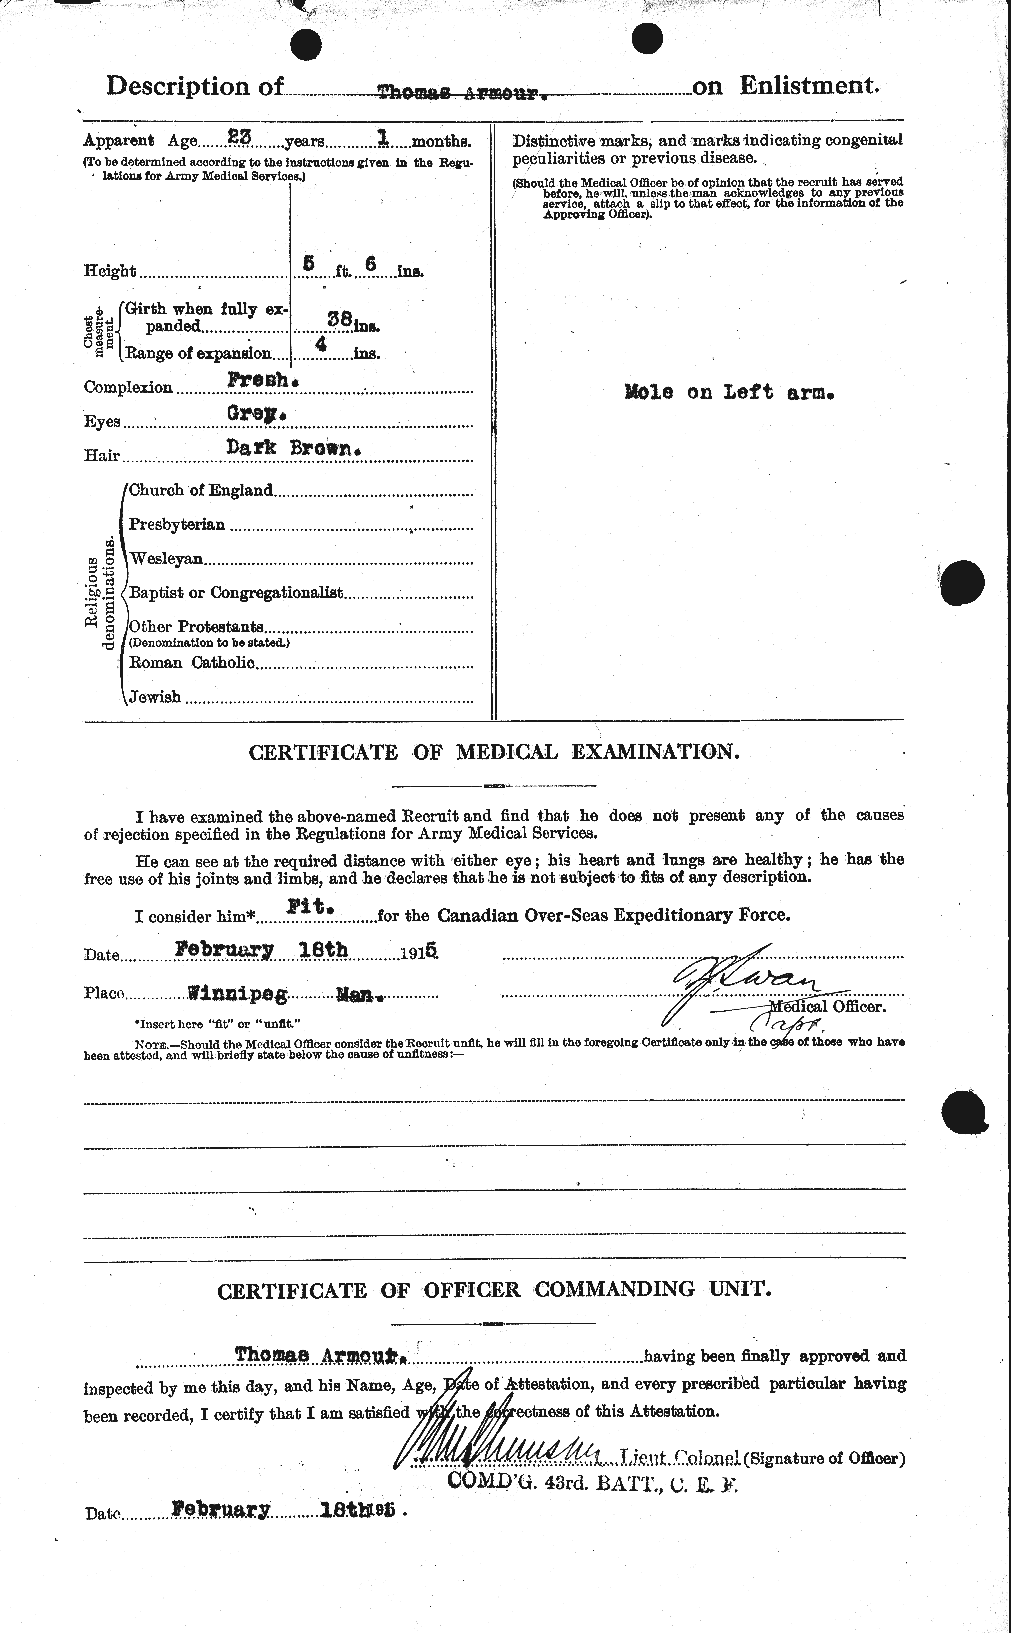 Personnel Records of the First World War - CEF 214039b